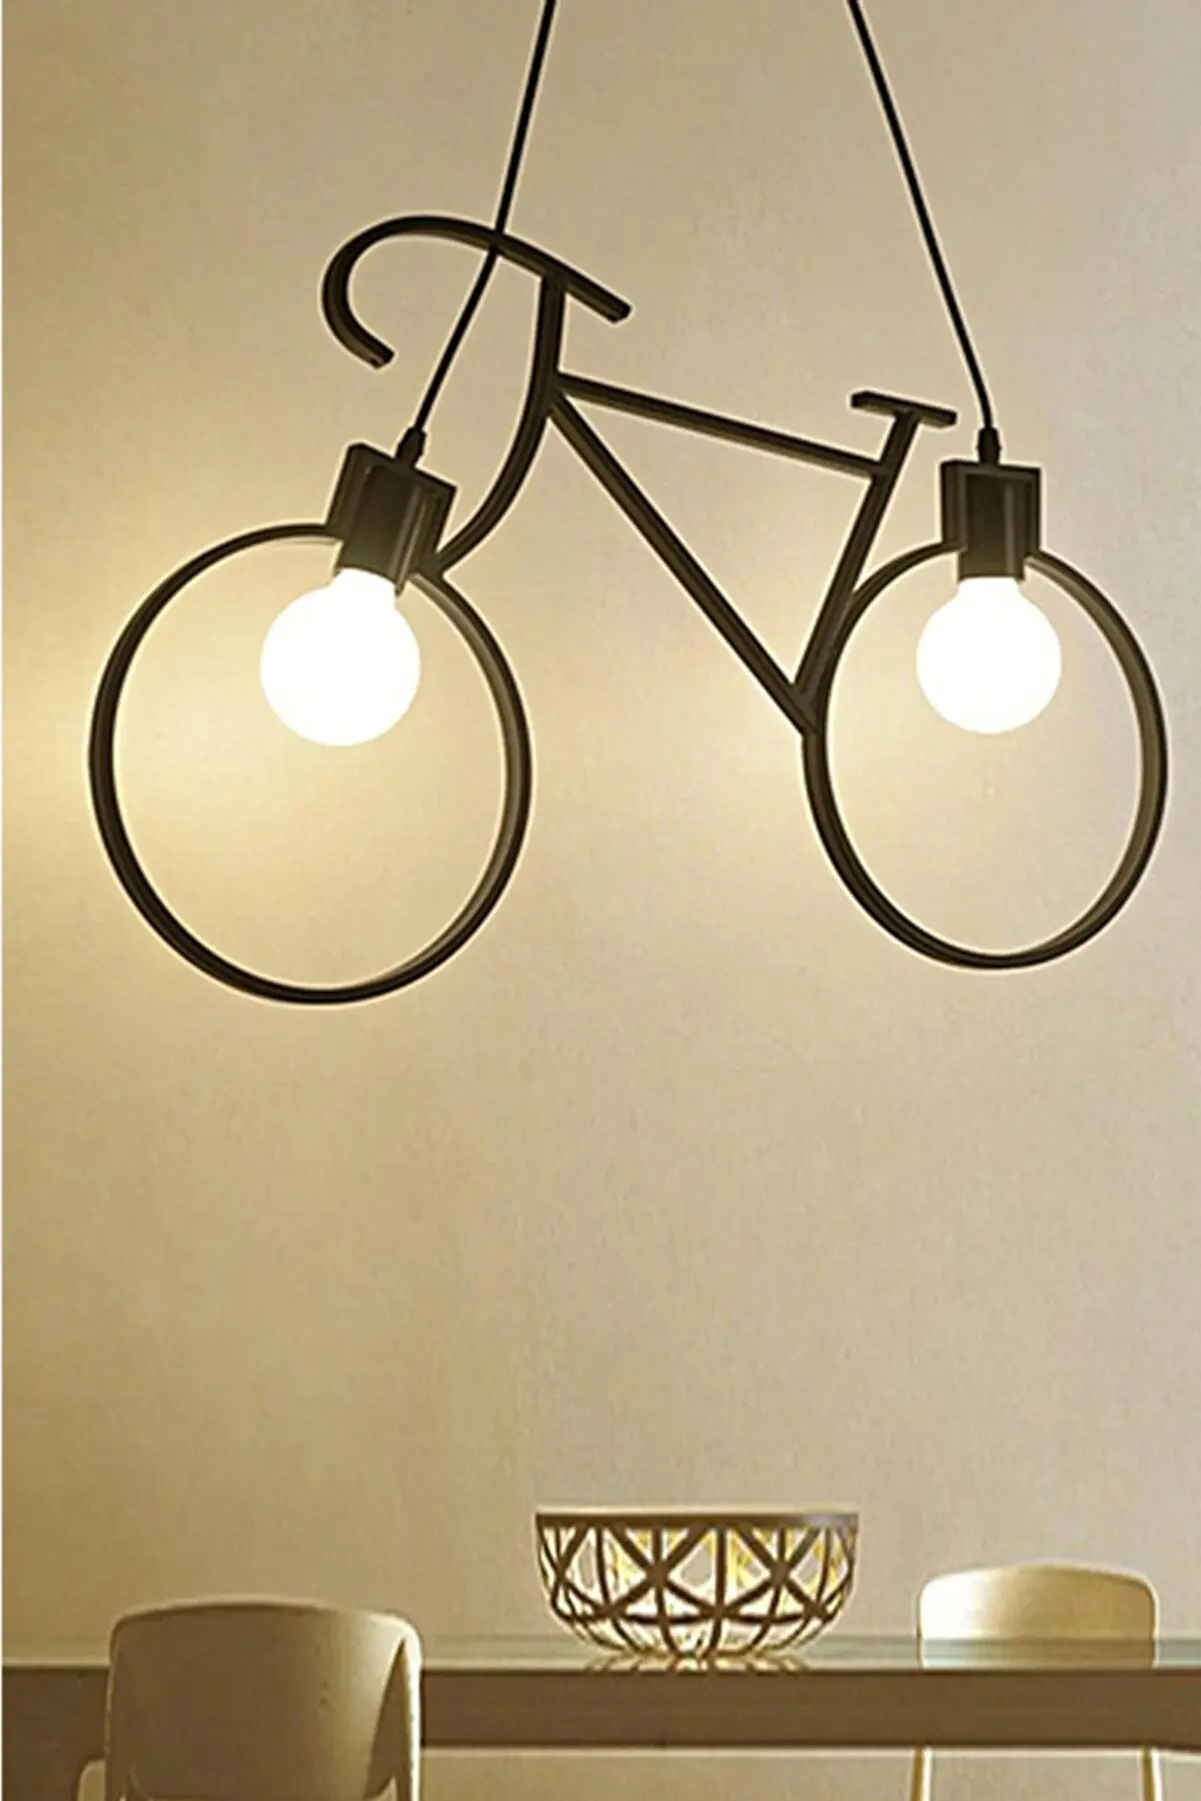 

Chandelier Lighting Bicycle Chandelier Black Metal Pendant Wrought Iron Retro Rustic Office Cafe Bar Hotel Modern Ceiling Lamp